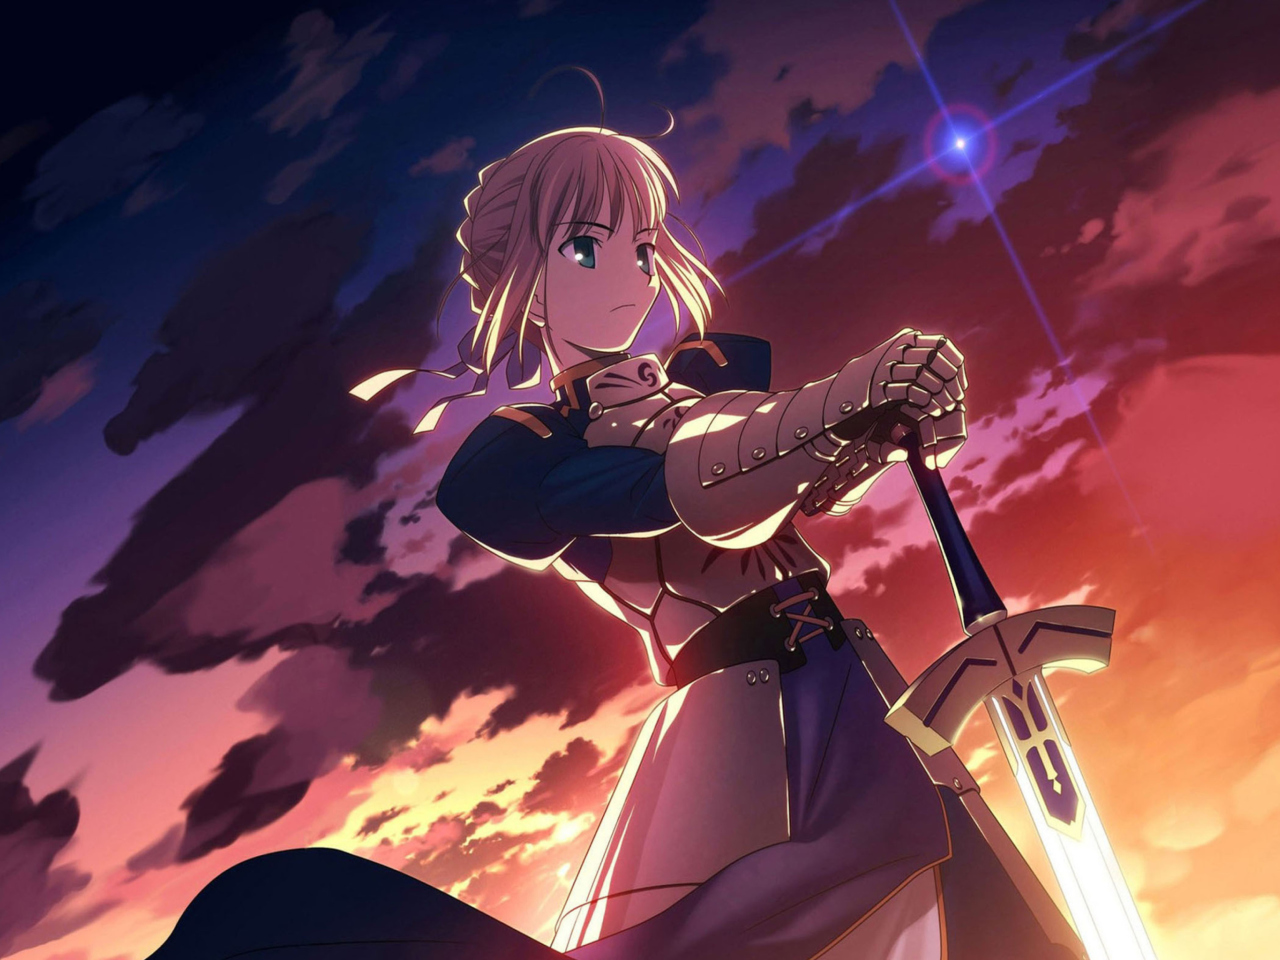 Das Saber from Fate/stay night Wallpaper 1280x960